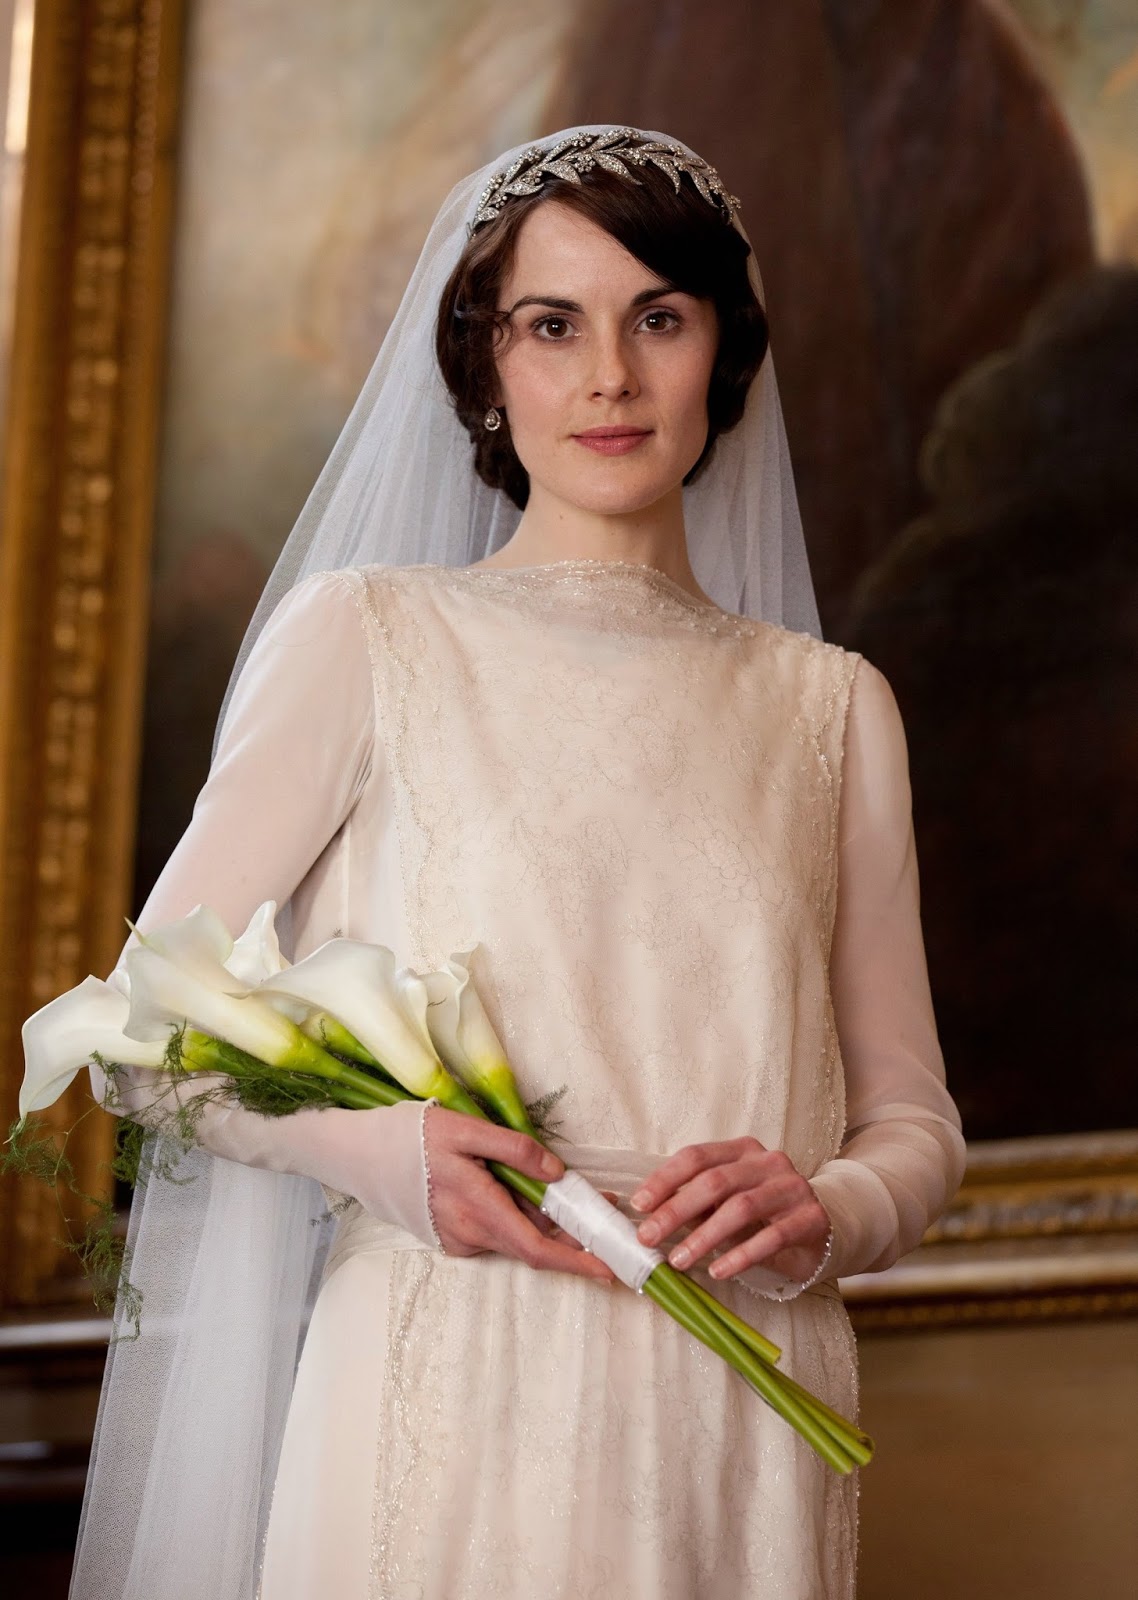 vintage wedding dresses with sleeves and lace  ,sheer long sleeves and column shape.And the headpiece and long veil